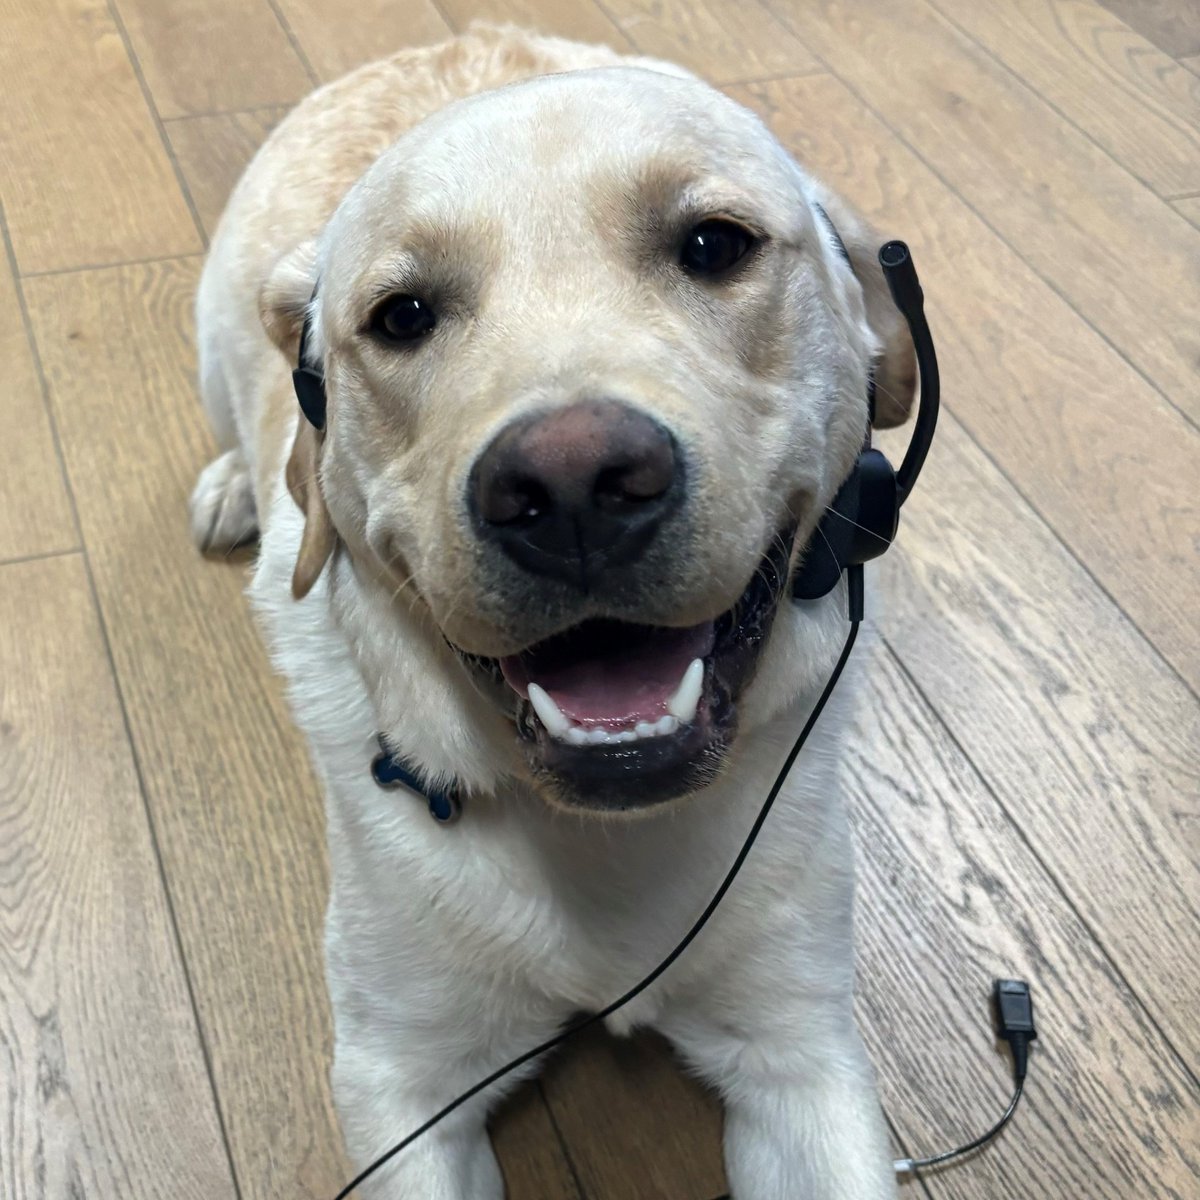 George heard we are hiring dispatchers, so he thought he would give it a shot to see if it was a good fit for him. What do you think... should we hire him? If you're interested in a career with WPS check out our job postings page on our website: woodstockpolice.ca/careers